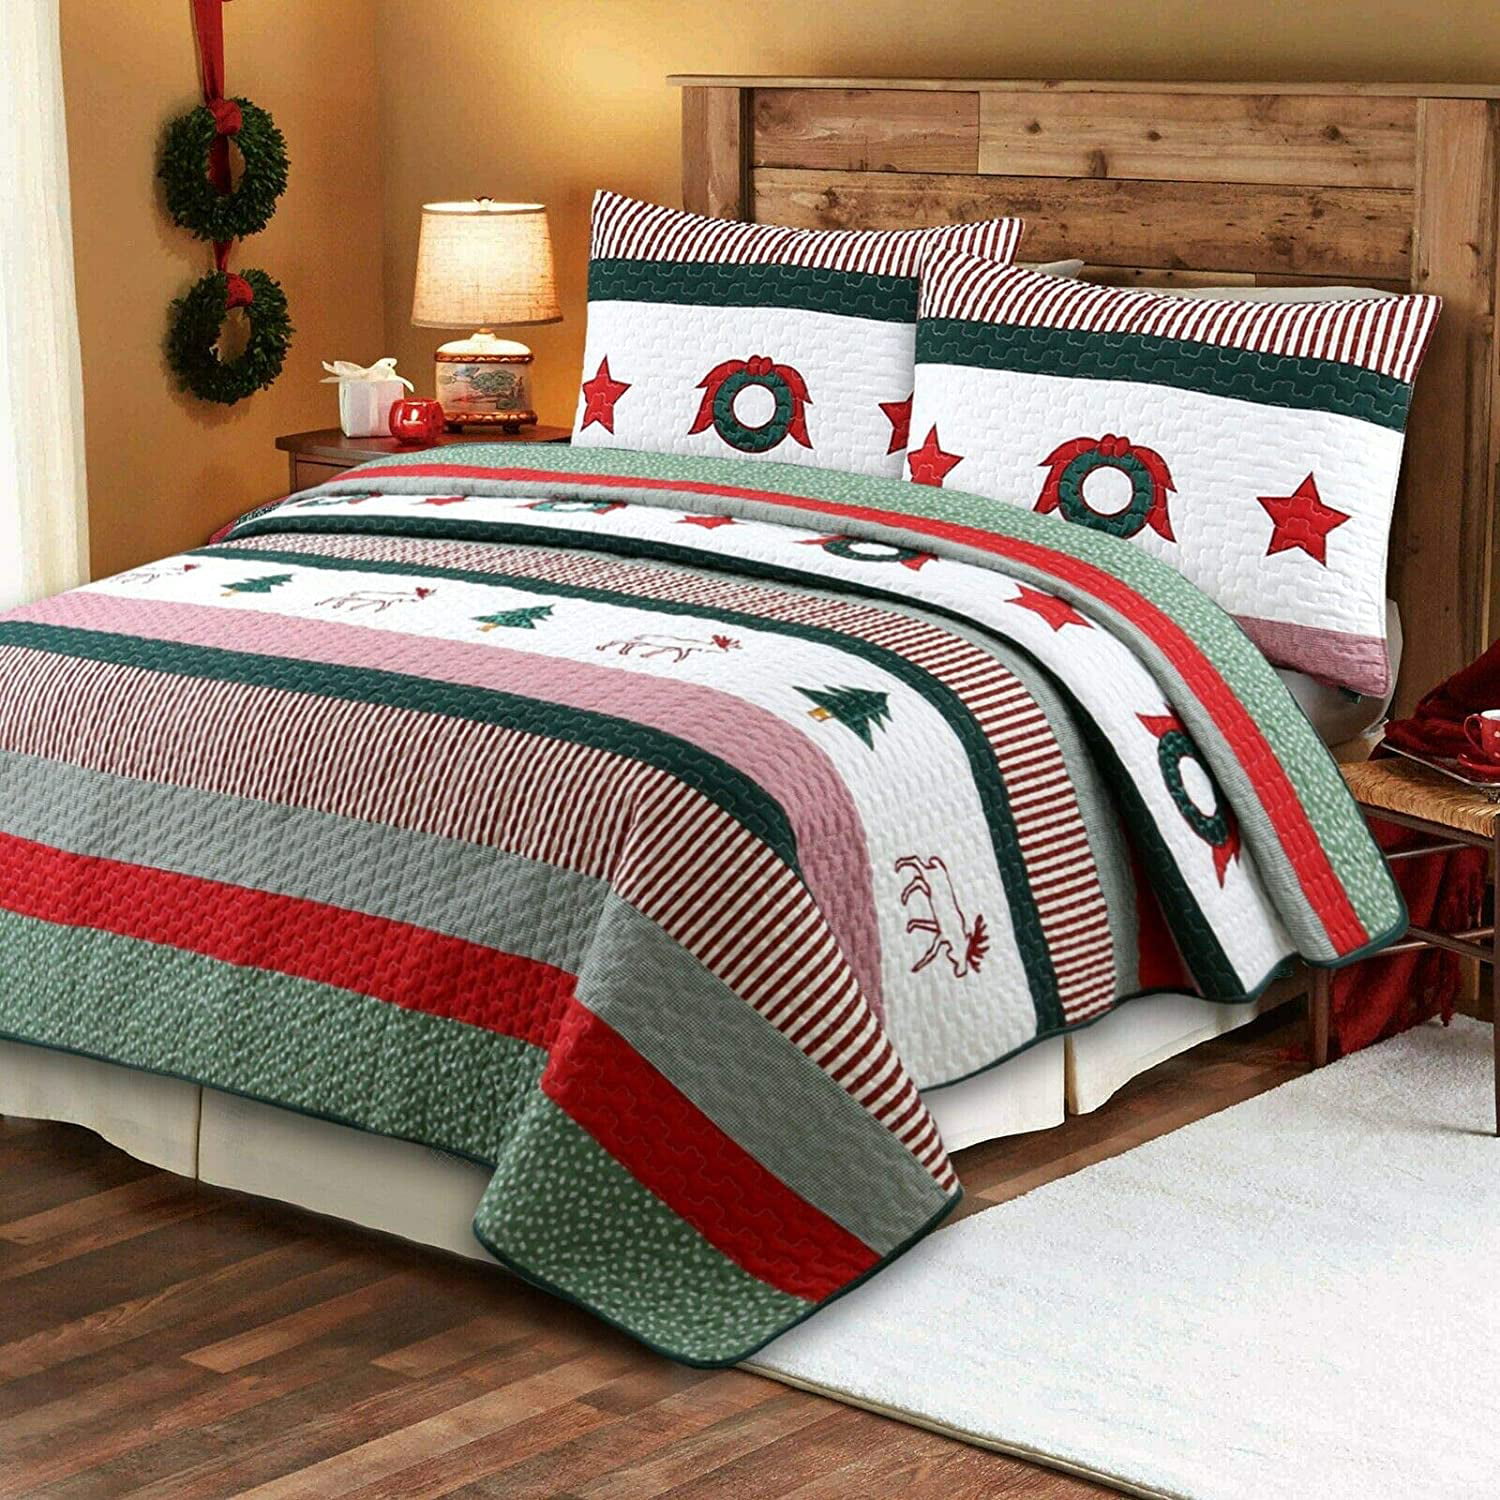 Details about   CELEBRATE TRADITION 72-IN x 72-IN “HOLIDAY PLAID” SHOWER CURTAIN 100% POLYESTER 